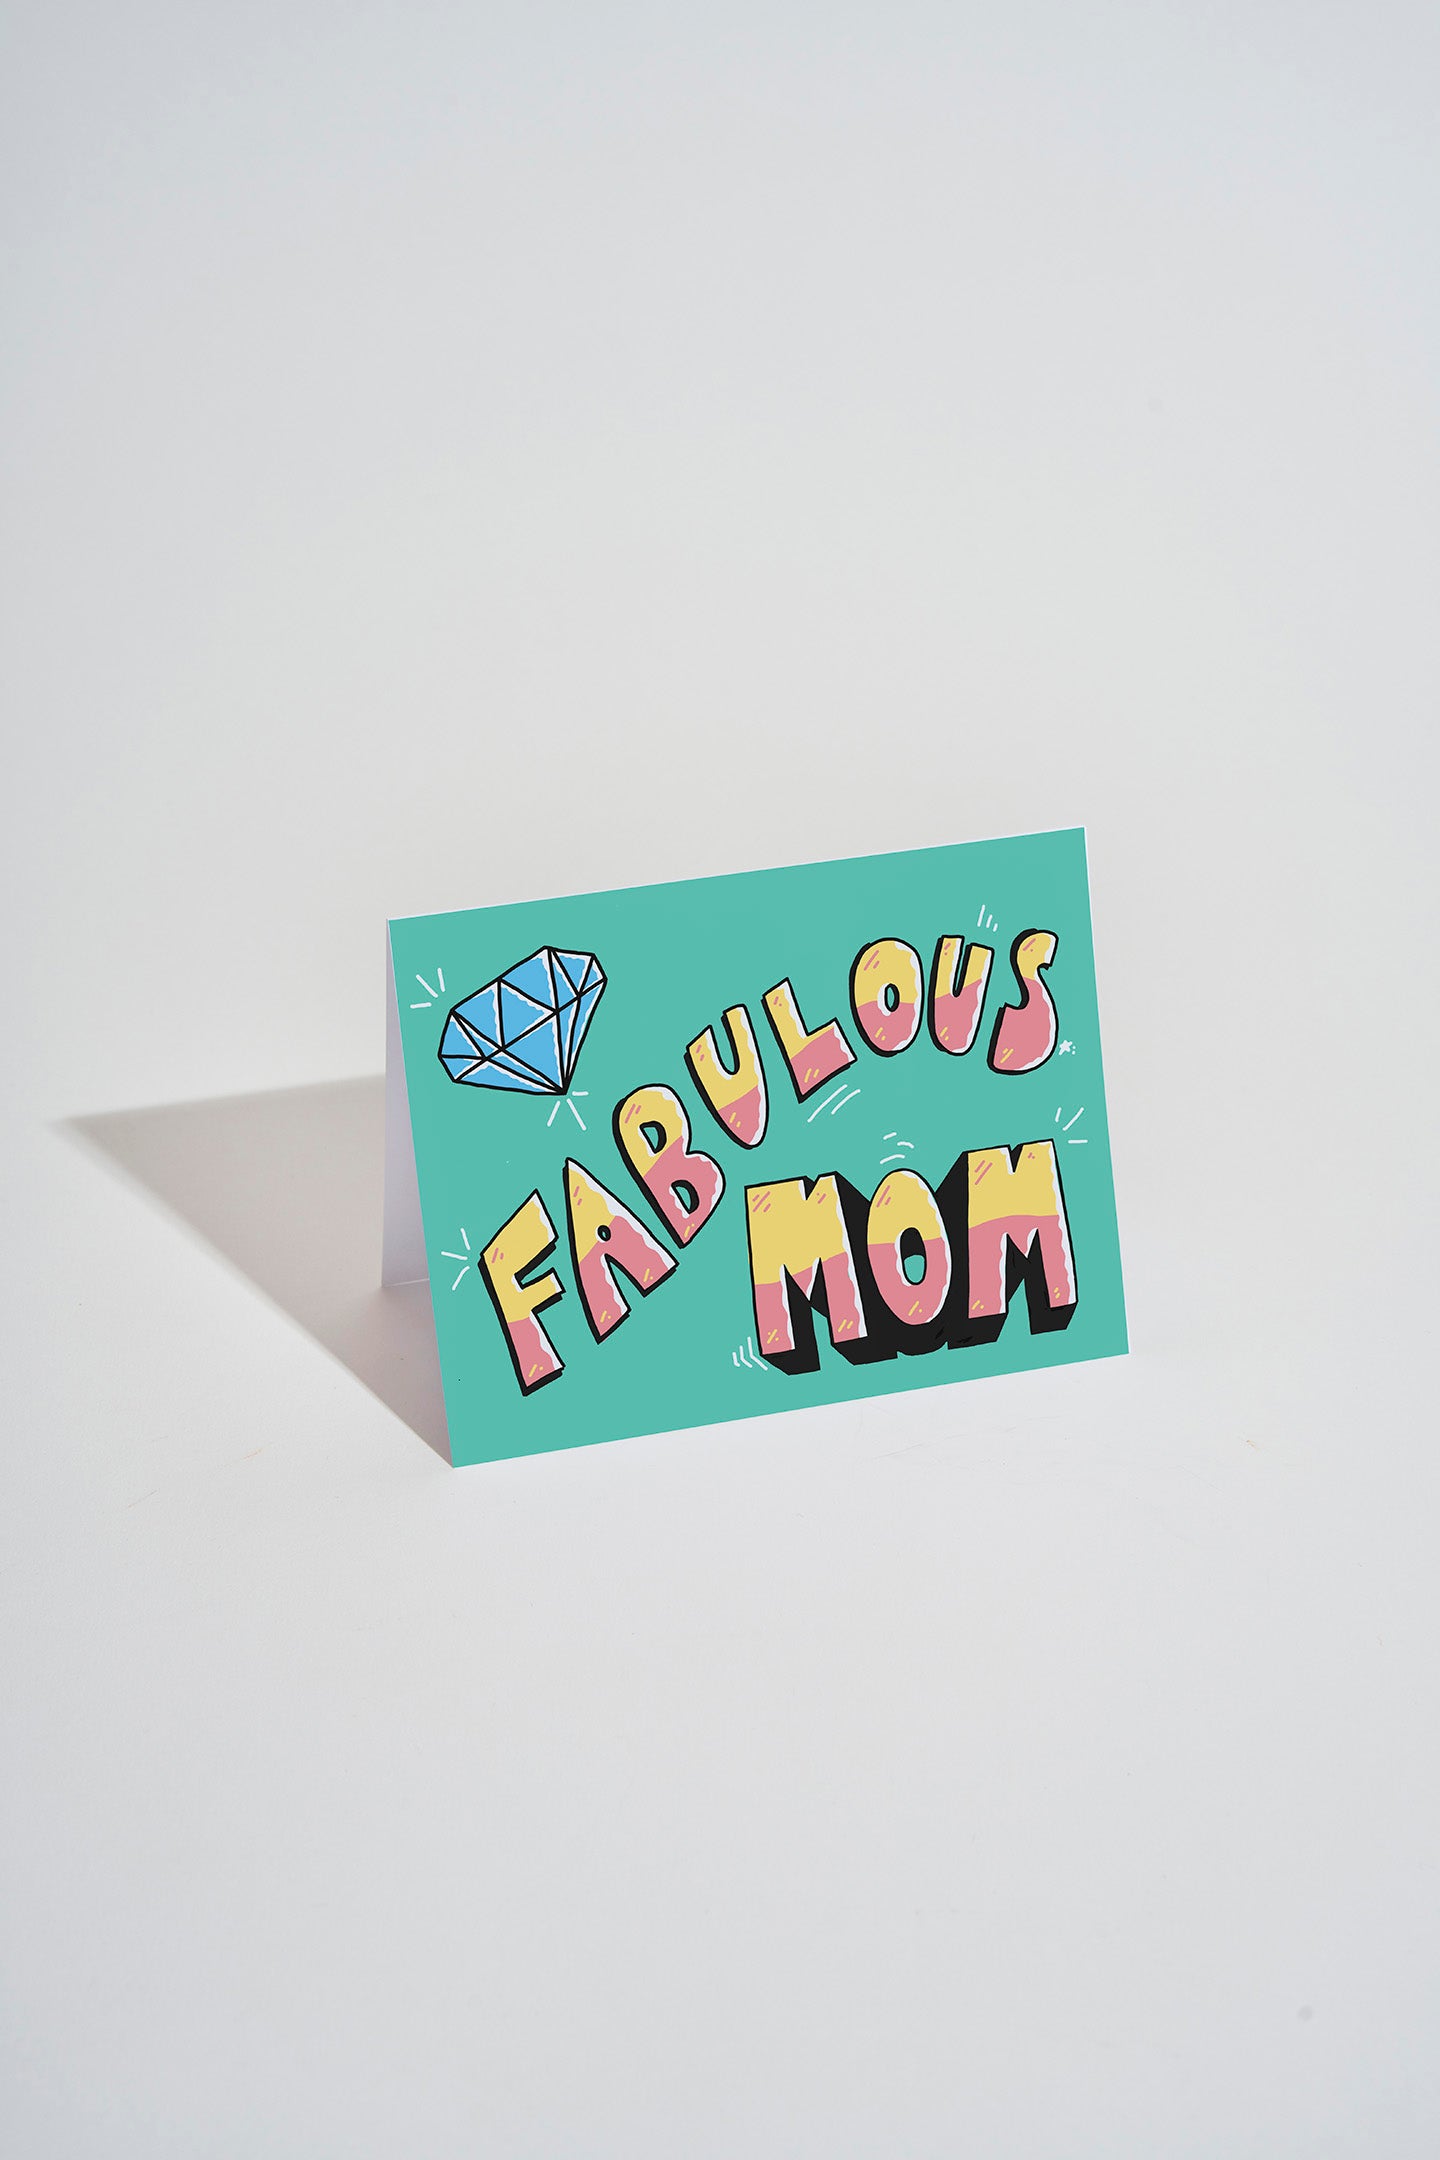 Greeting Card- Mothers Day